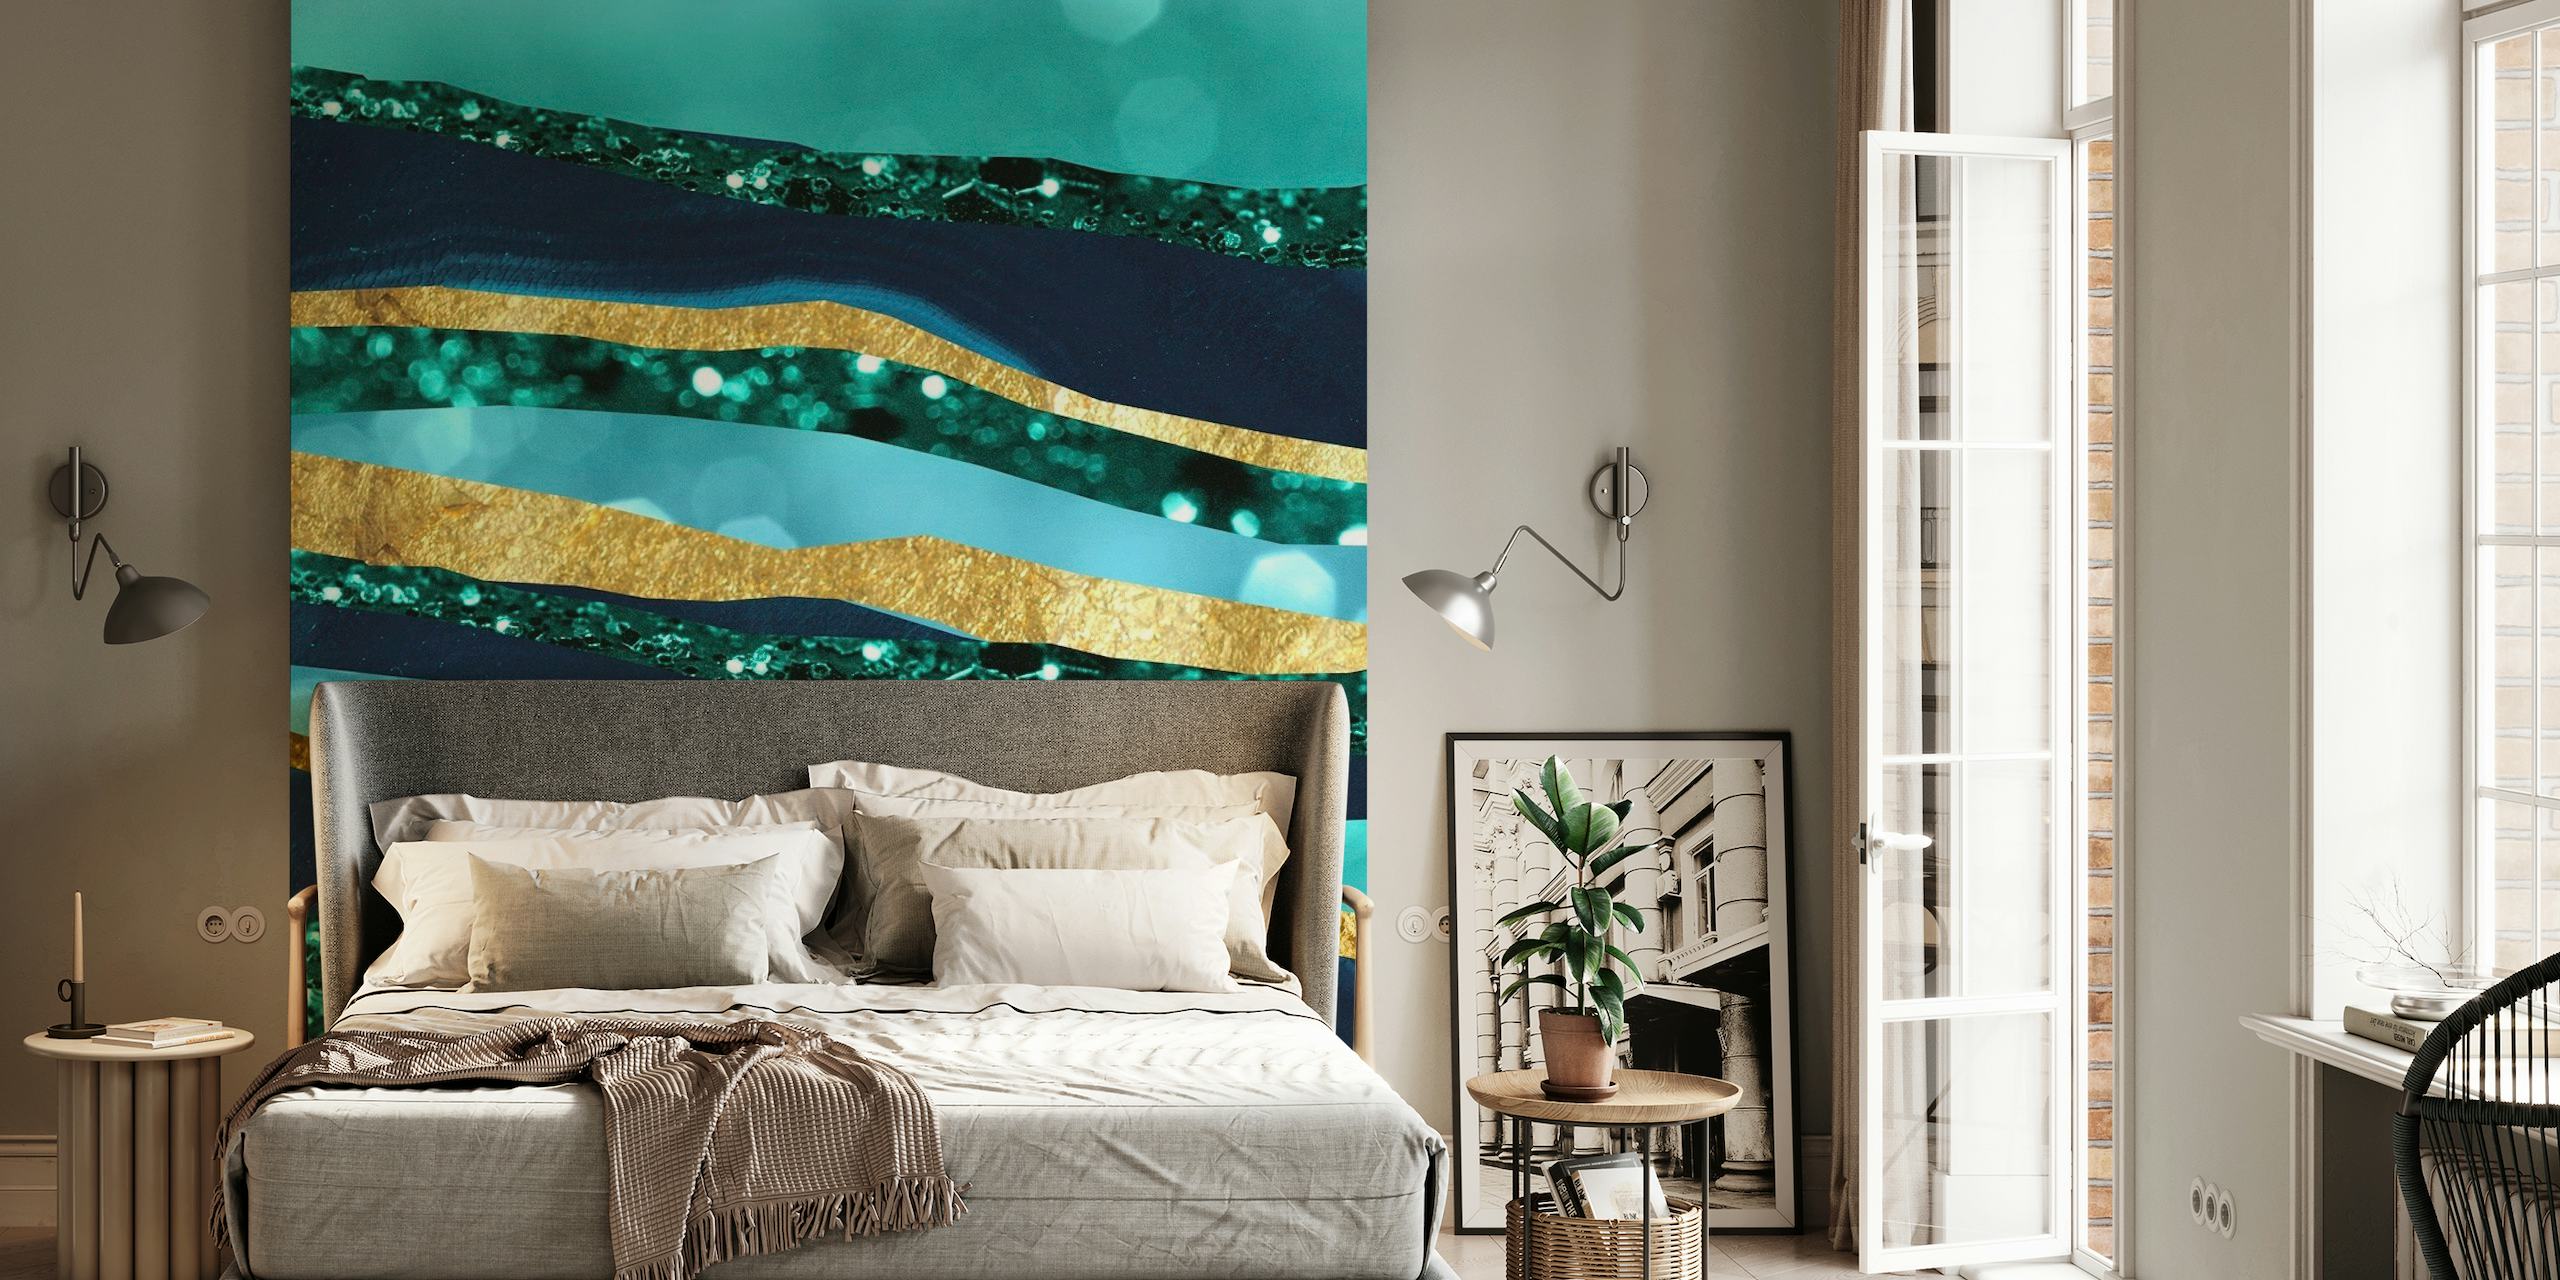 Abstract mountain layers in teal and blue with gold accents resembling moonlit reflections on water.